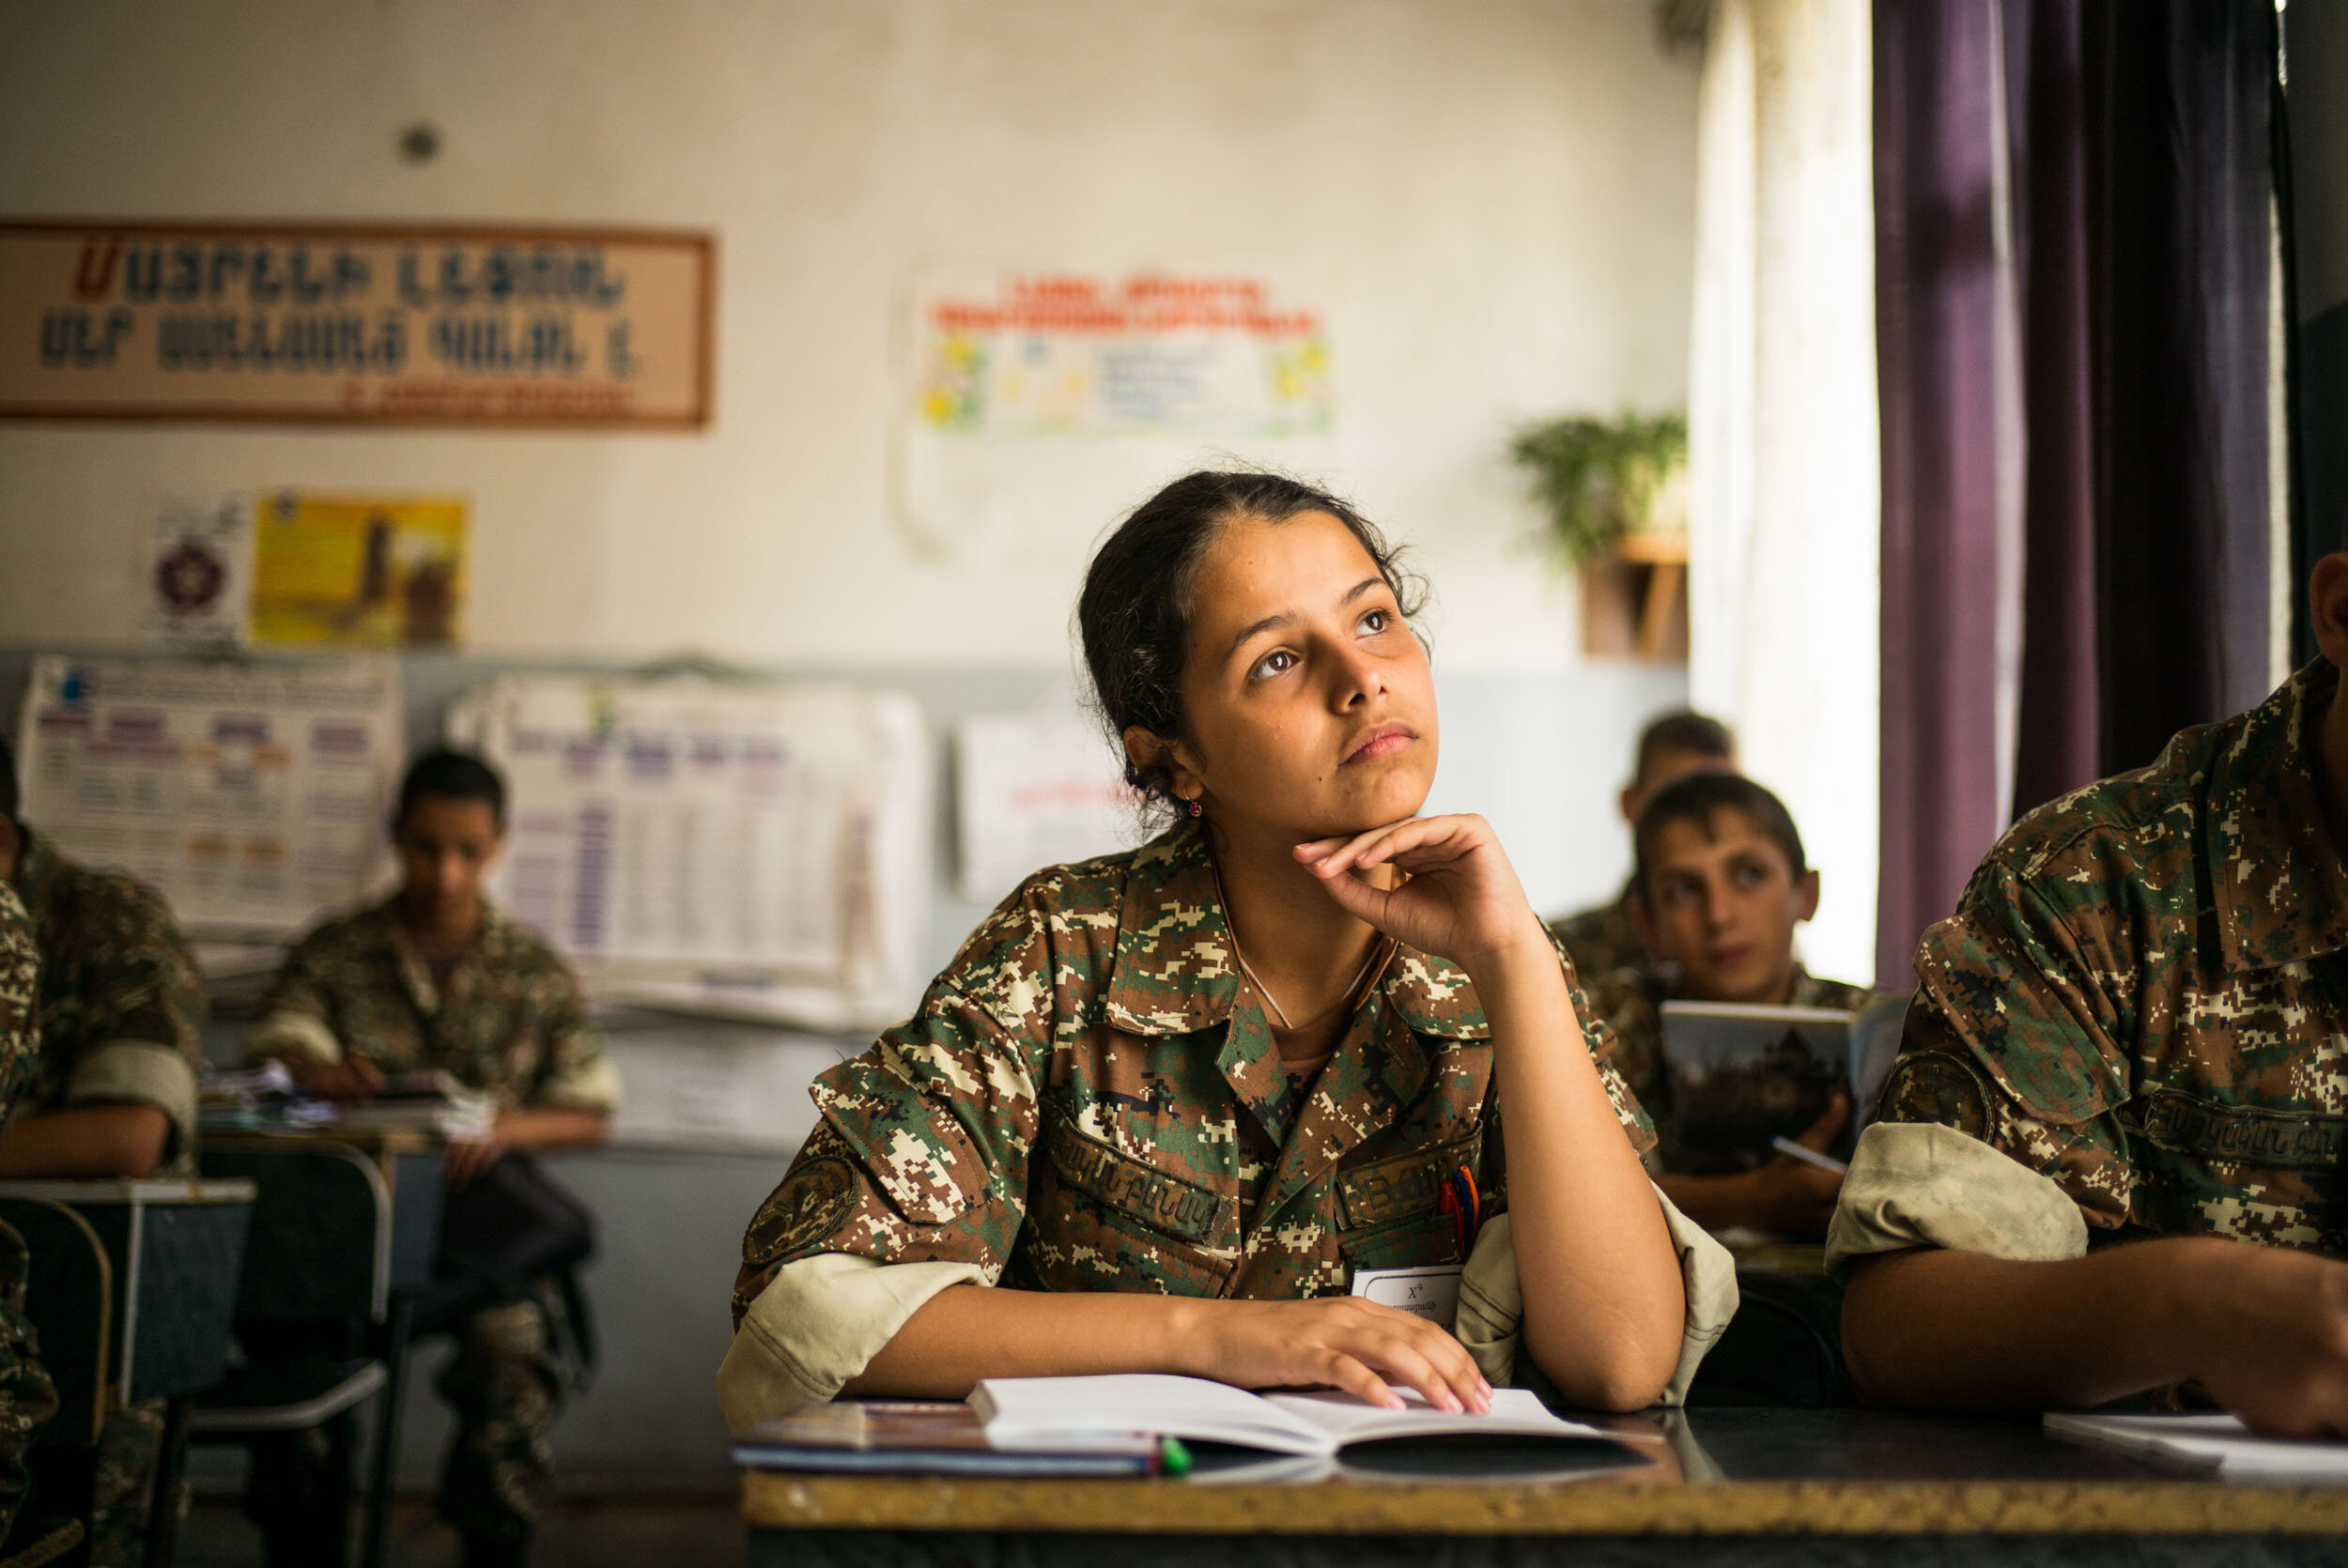  Lena, 15, during clases at Stepanakert Military High School in the self-proclaimed region Nagorny Karabakh. She is one of the first 11 girls who were admitted into this military institution in 2016. 